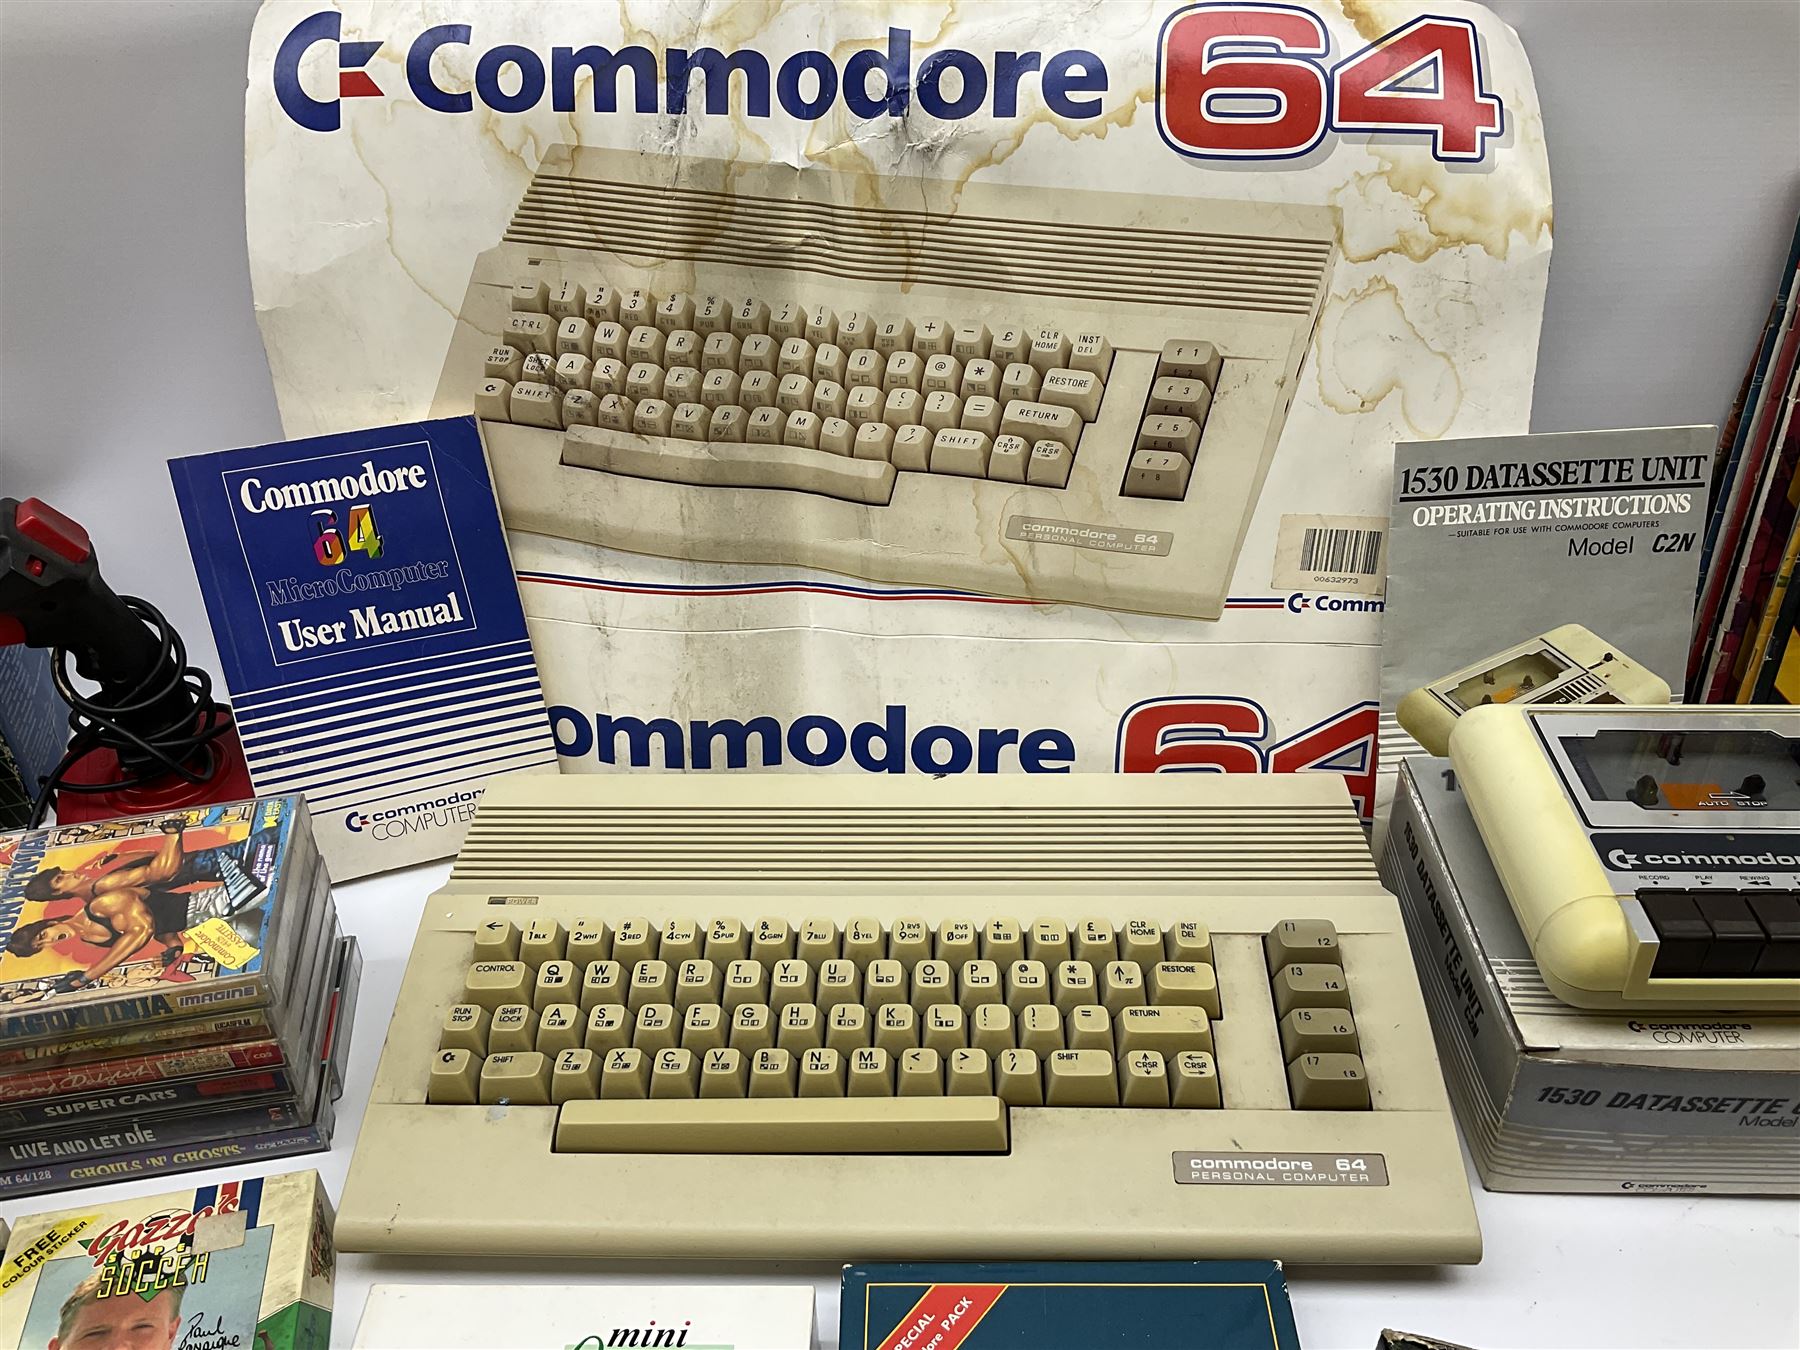 Commodore 64 games computer with boxed 1530 Datassette Unit Model C2N - Image 2 of 8